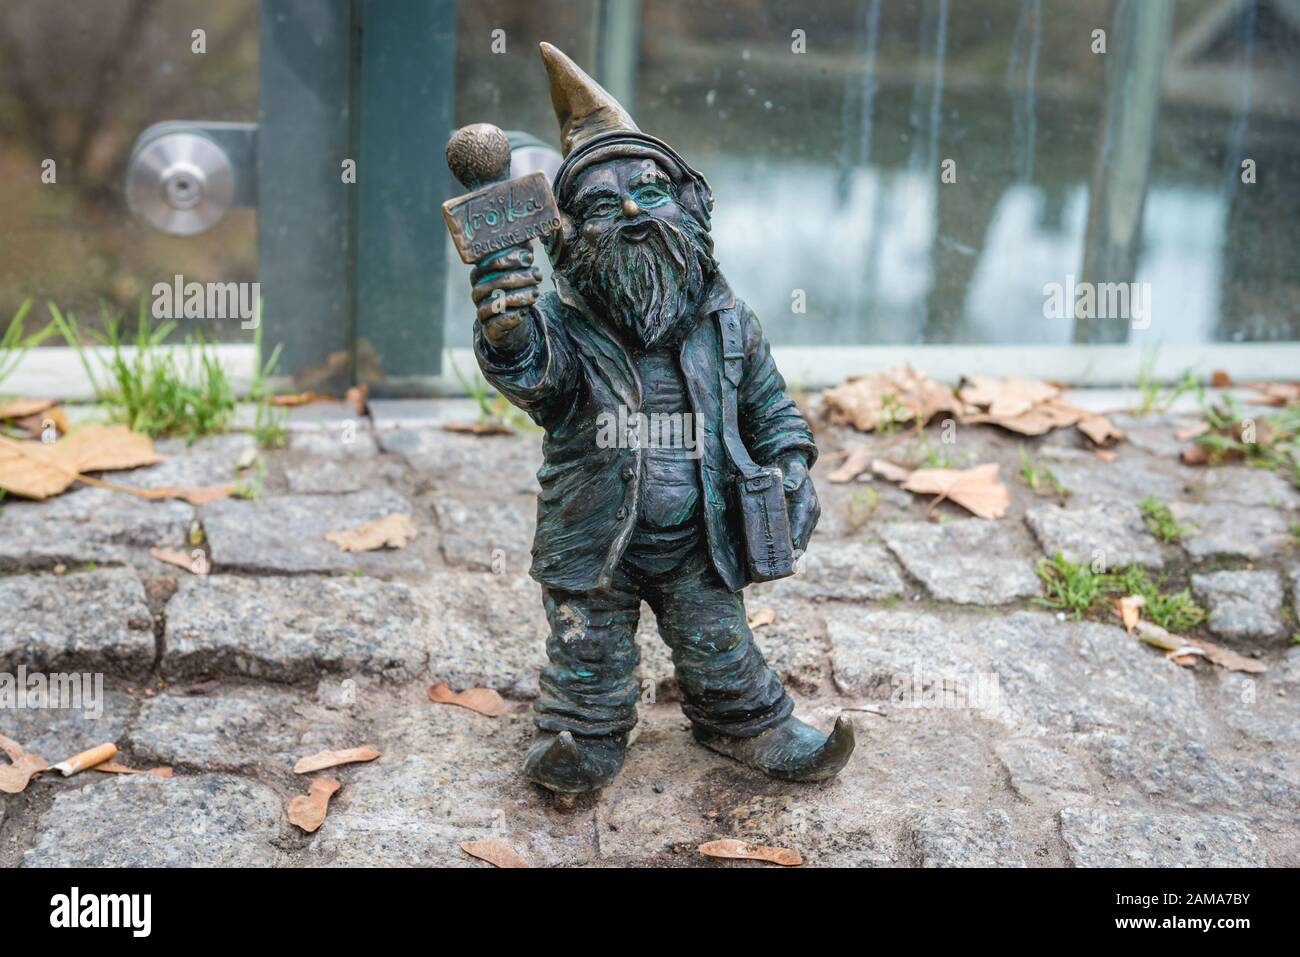 Figurine of radio journalist dwarf on the Old Town of Wroclaw in Silesia region of Poland Stock Photo